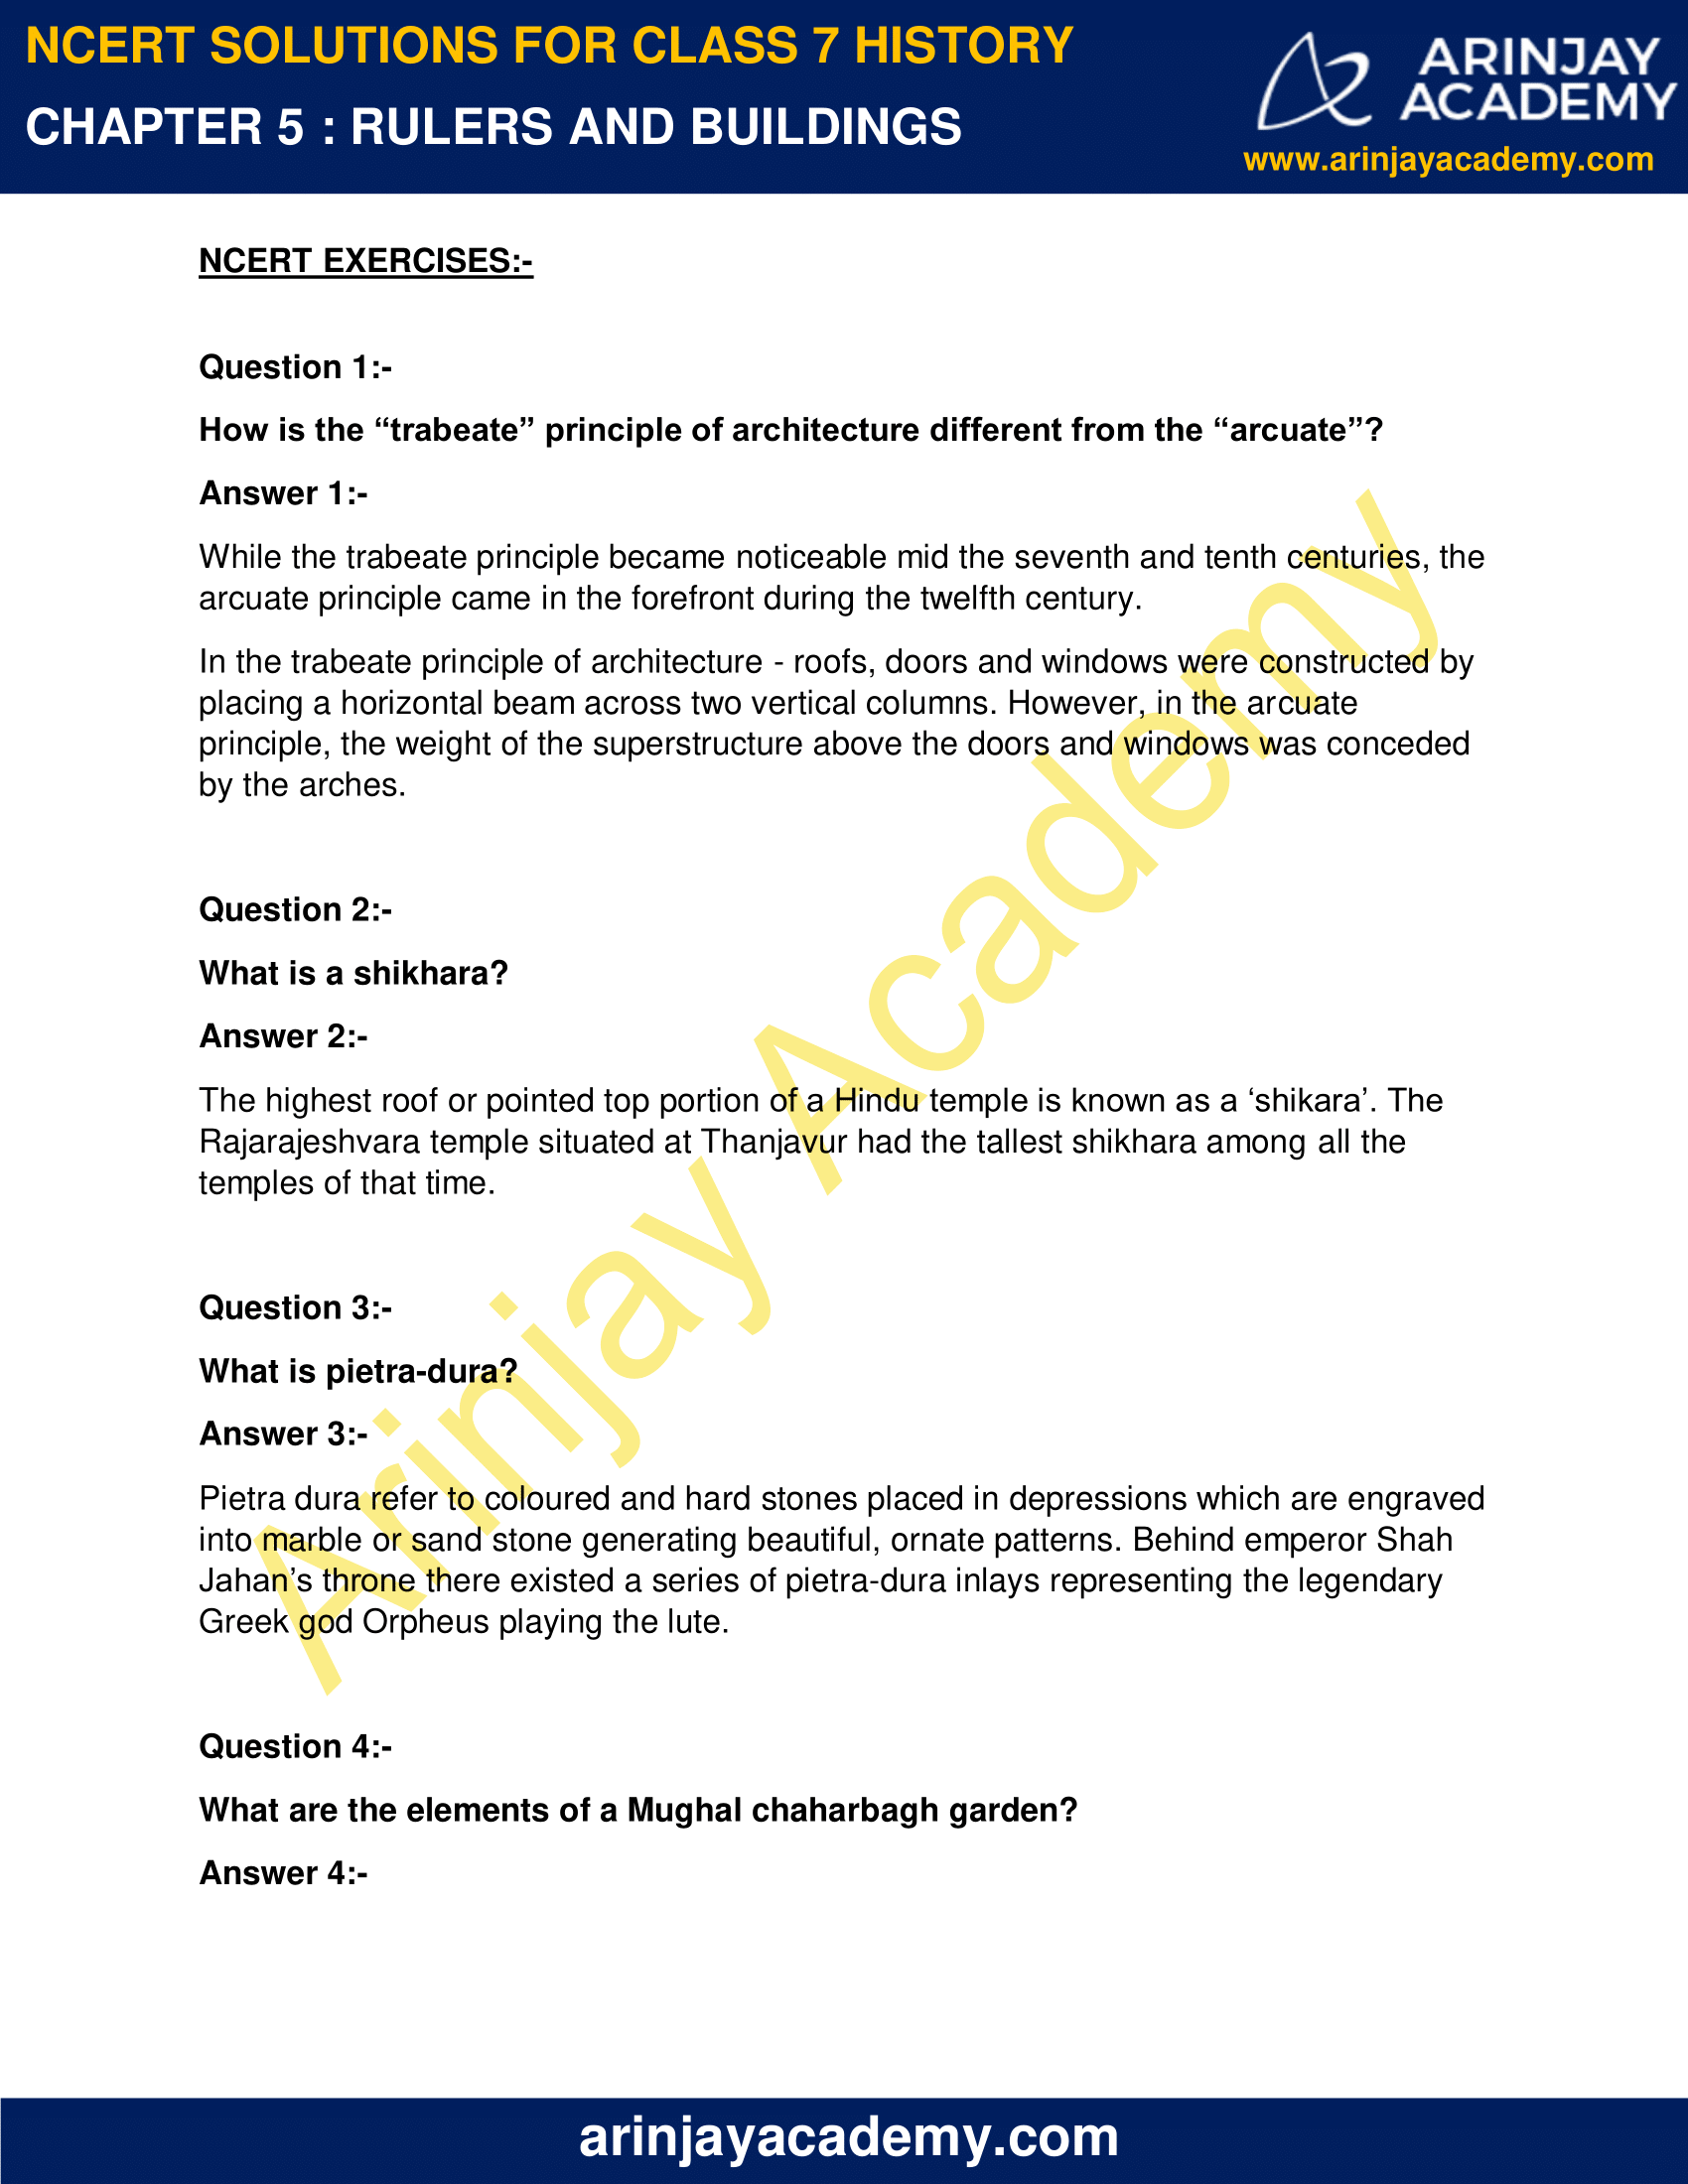 class 7 history case study questions